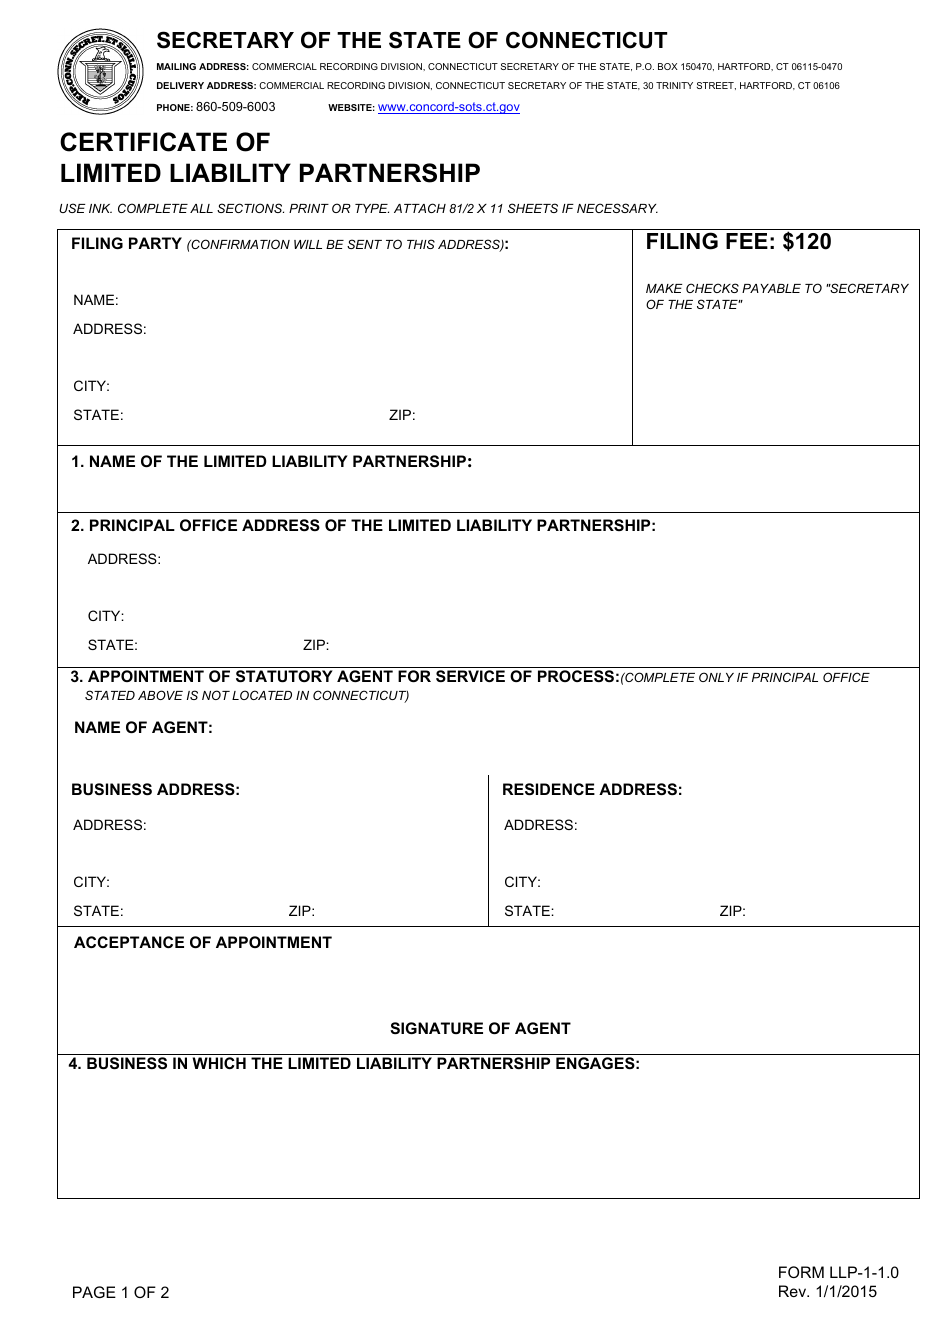 Form LLP-1-1.0 Certificate of Limited Liability Partnership - Connecticut, Page 1